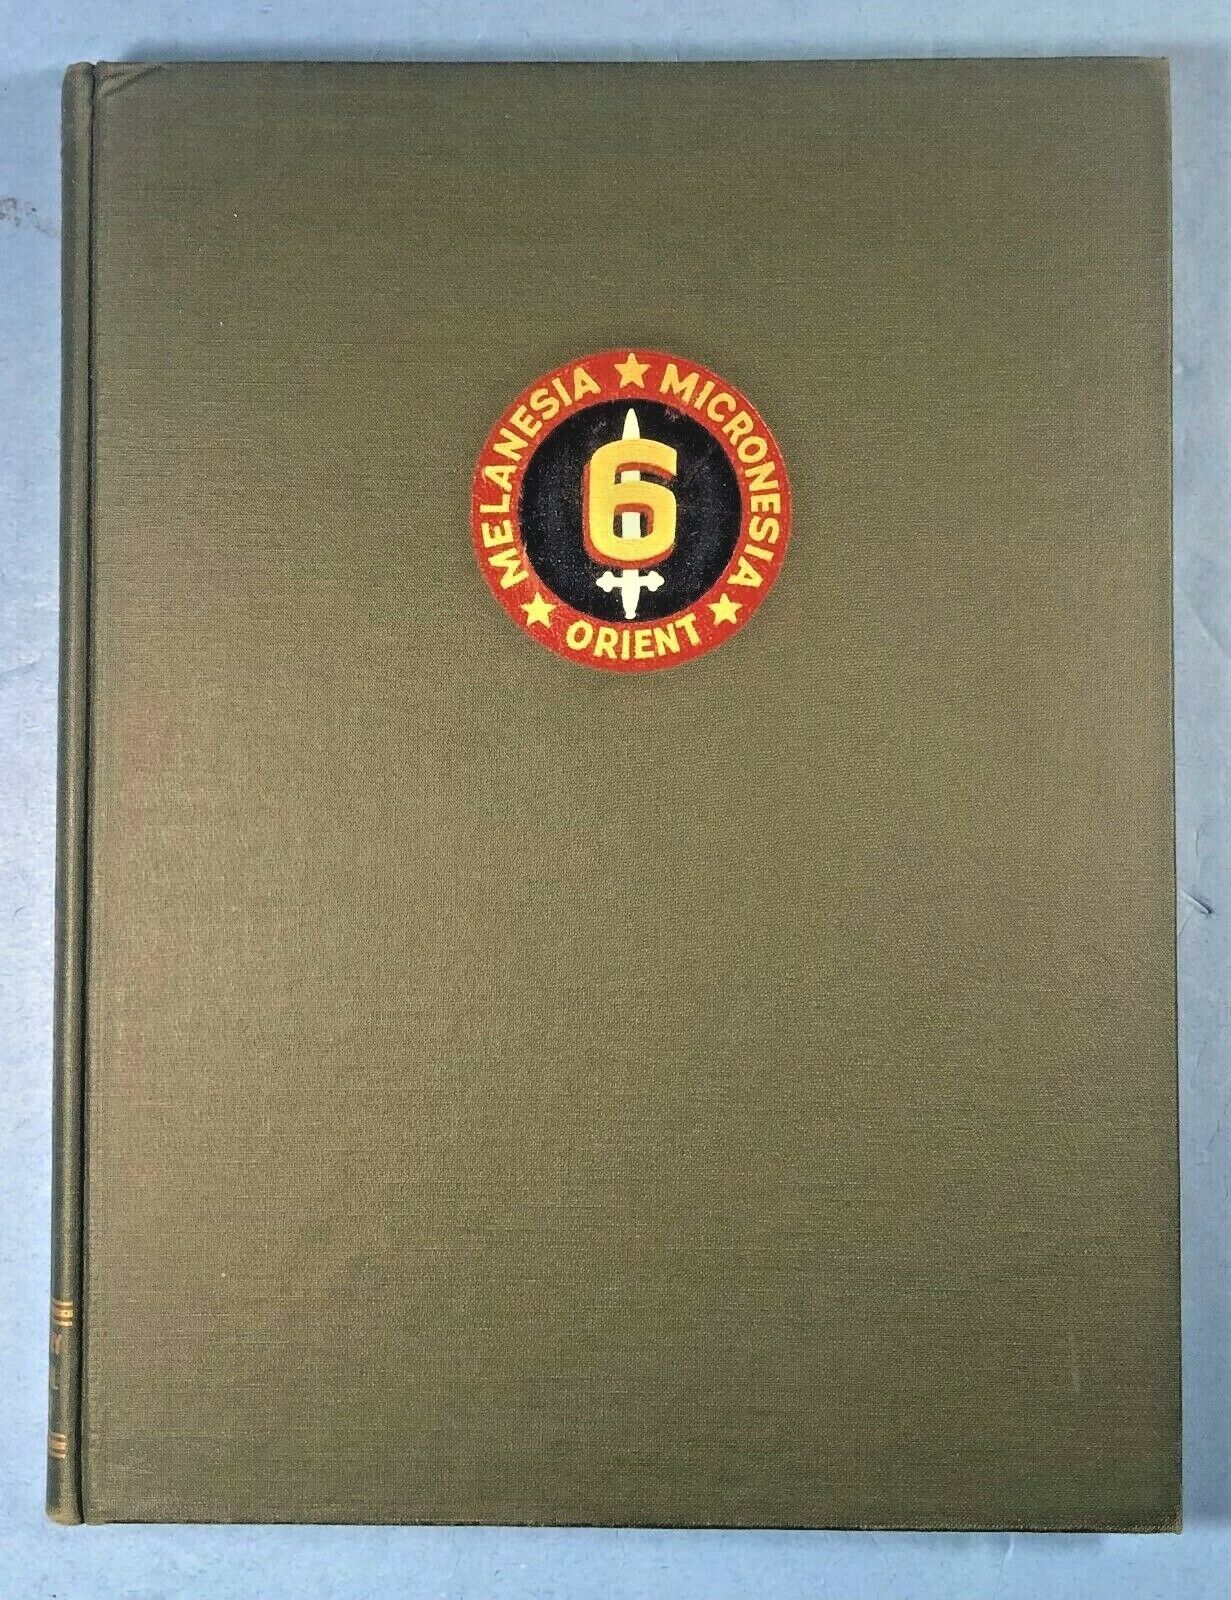 WW 2, USMC 6th Division History, 1st Ed., Signed by Lemuel Shepherd, Exc. Cond.